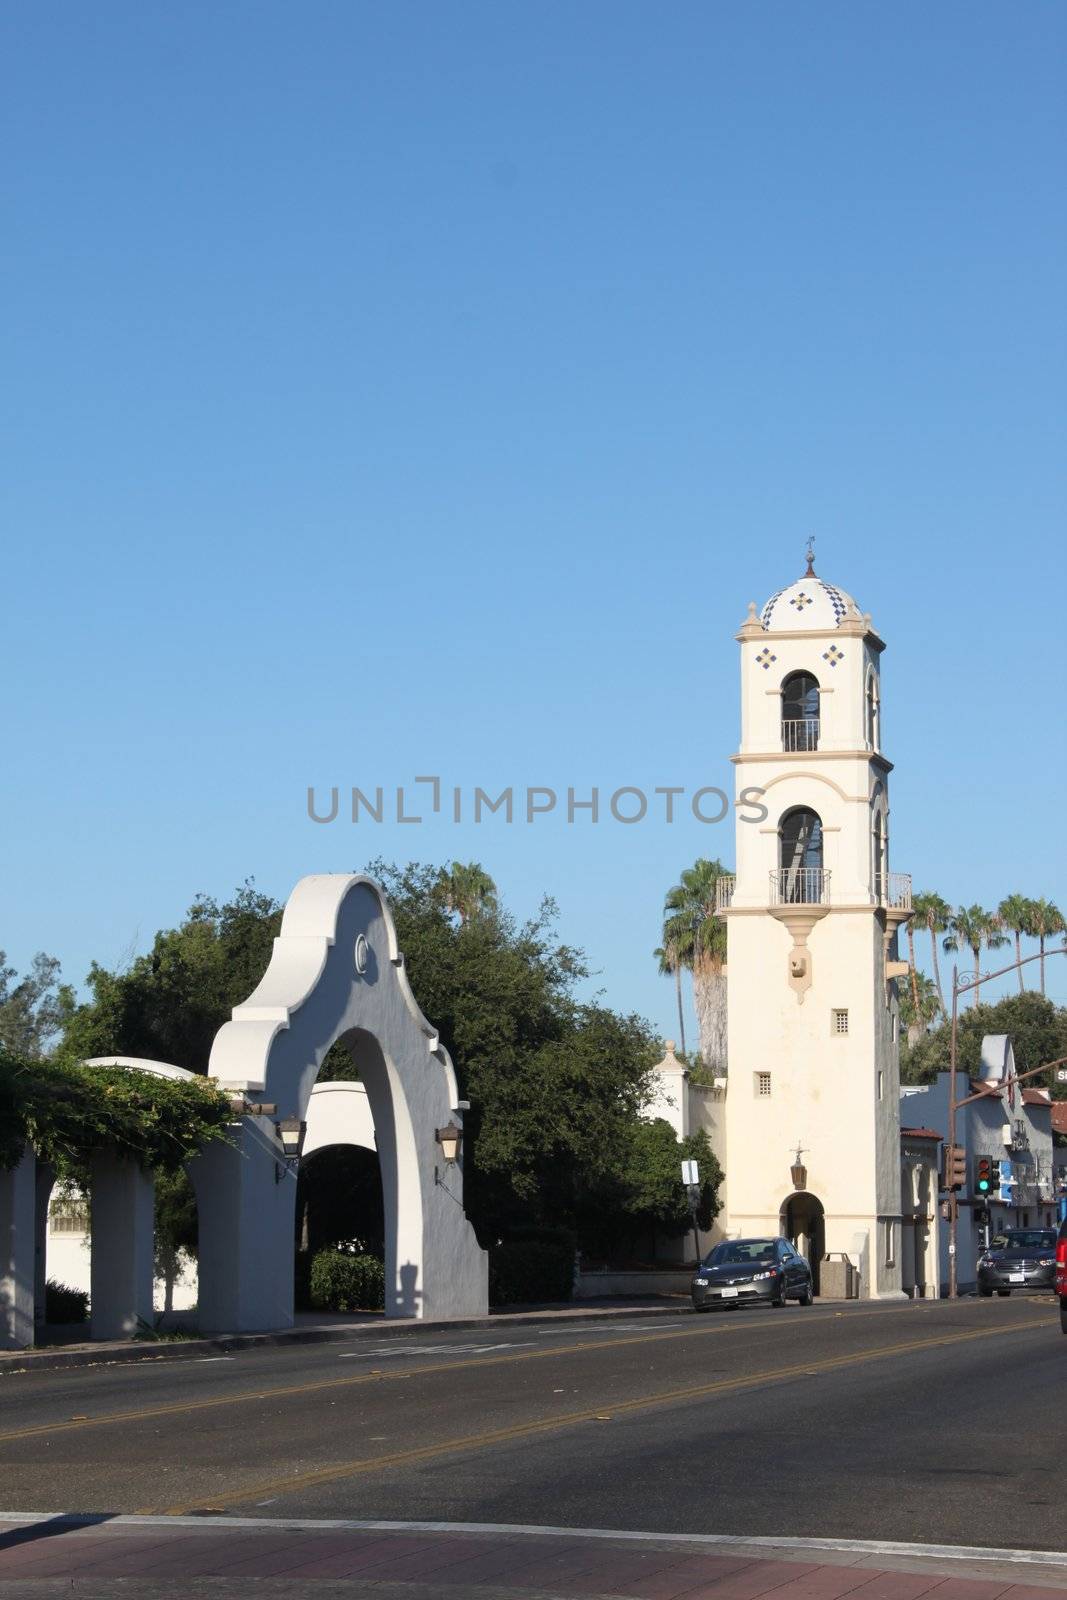 Downtown Ojai by hlehnerer